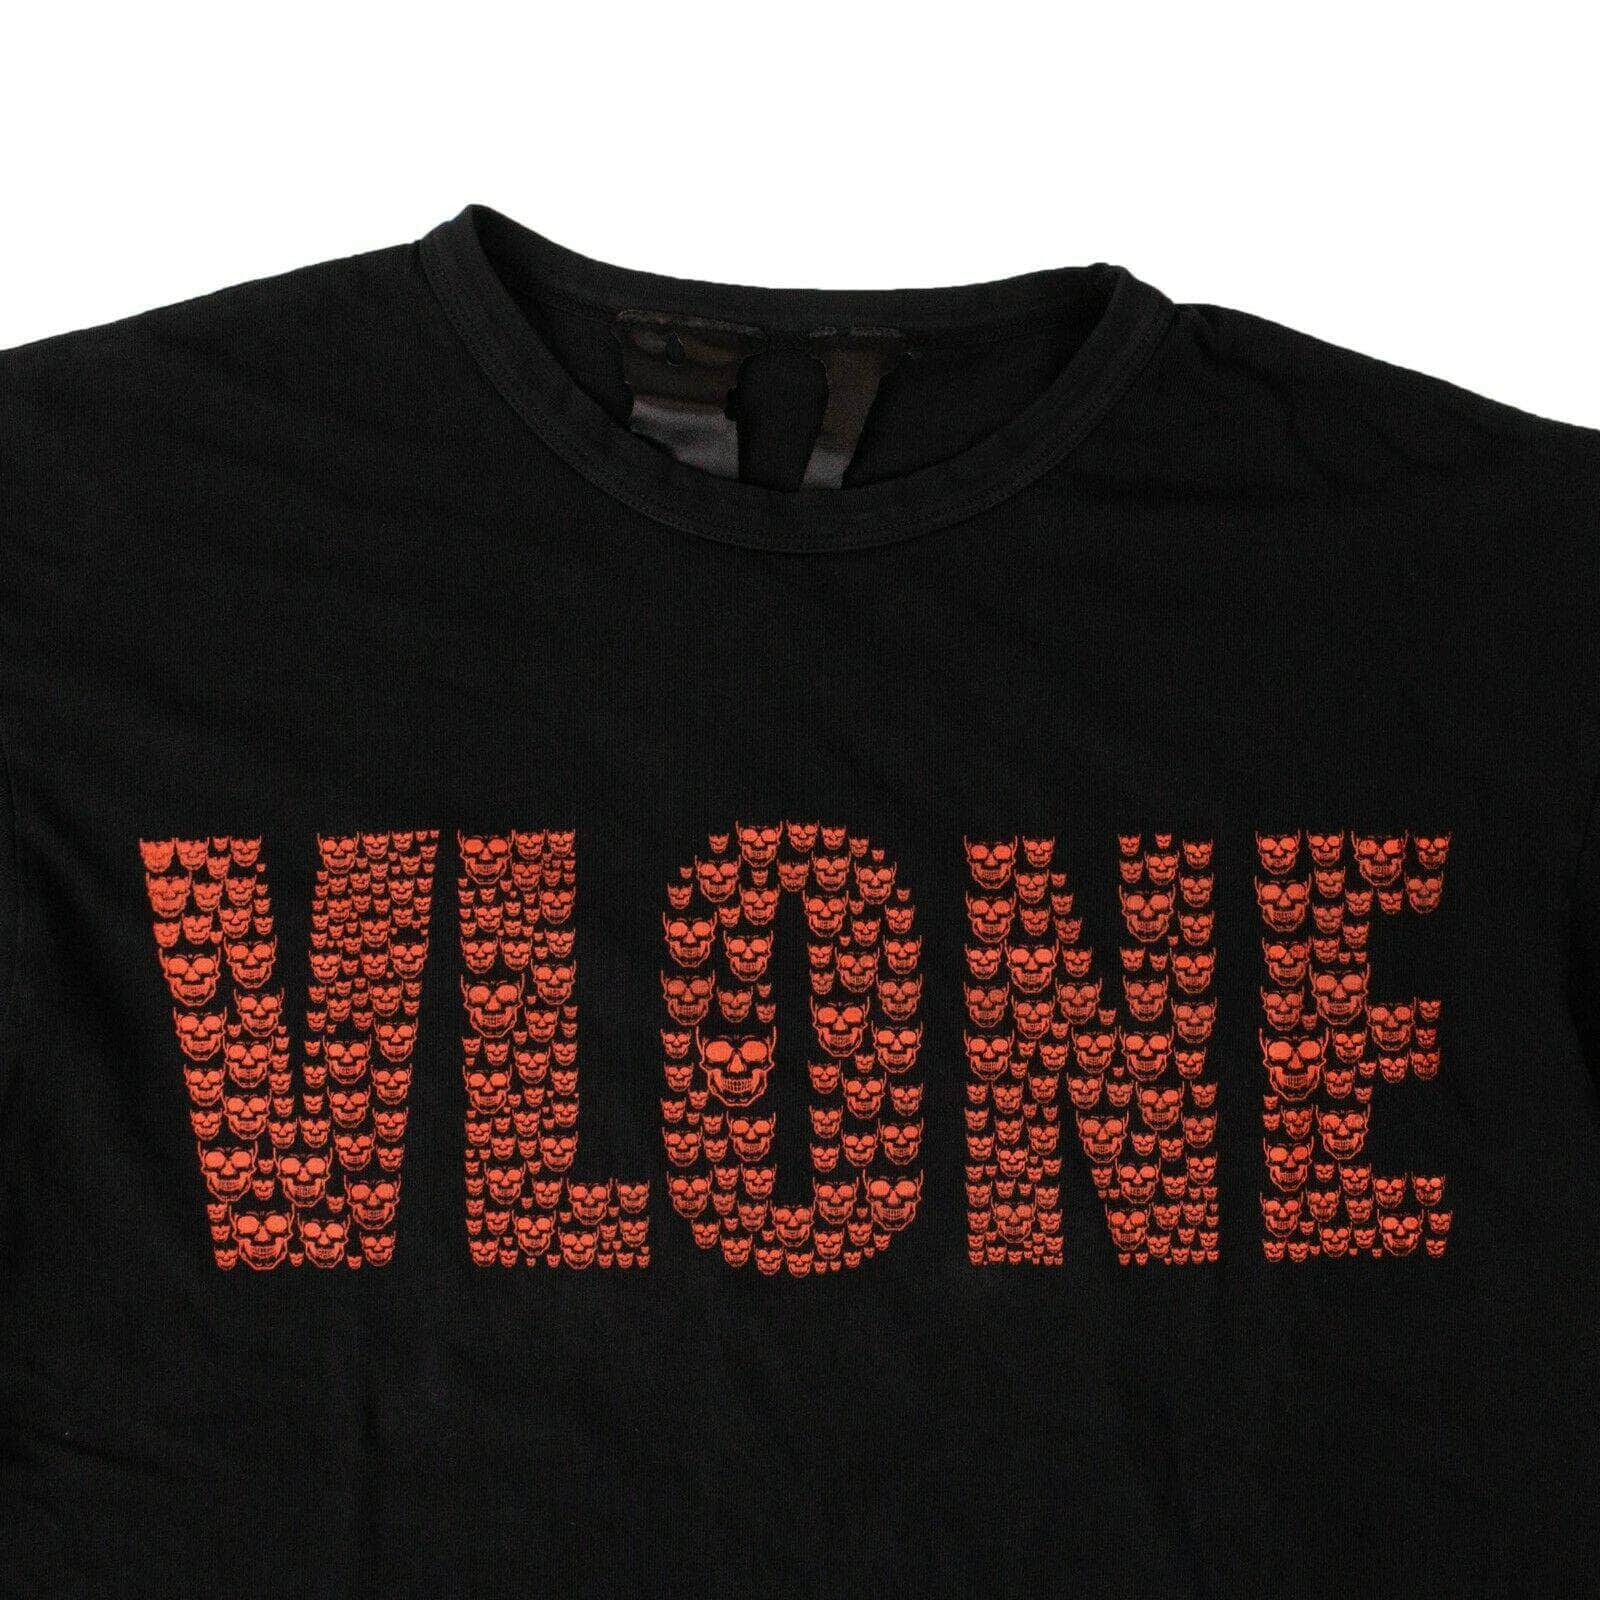 Vlone 250-500, chicmi, couponcollection, gender-mens, main-clothing, mens-shoes, size-s, vlone S Men's Black Cotton Red Skull T-Shirt 83-VLN-1005/S